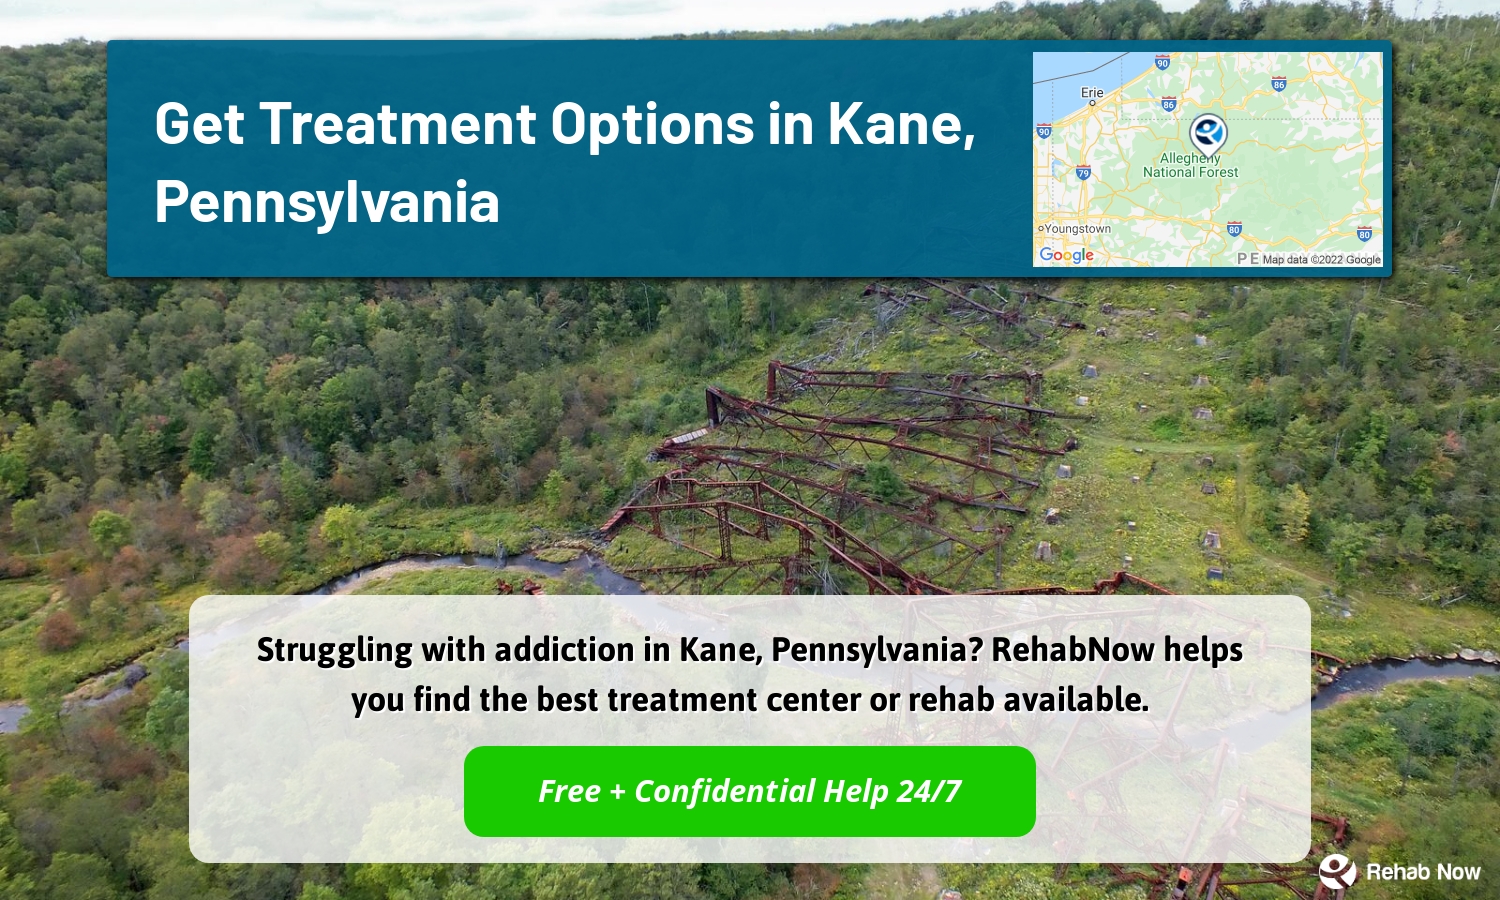 Struggling with addiction in Kane, Pennsylvania? RehabNow helps you find the best treatment center or rehab available.